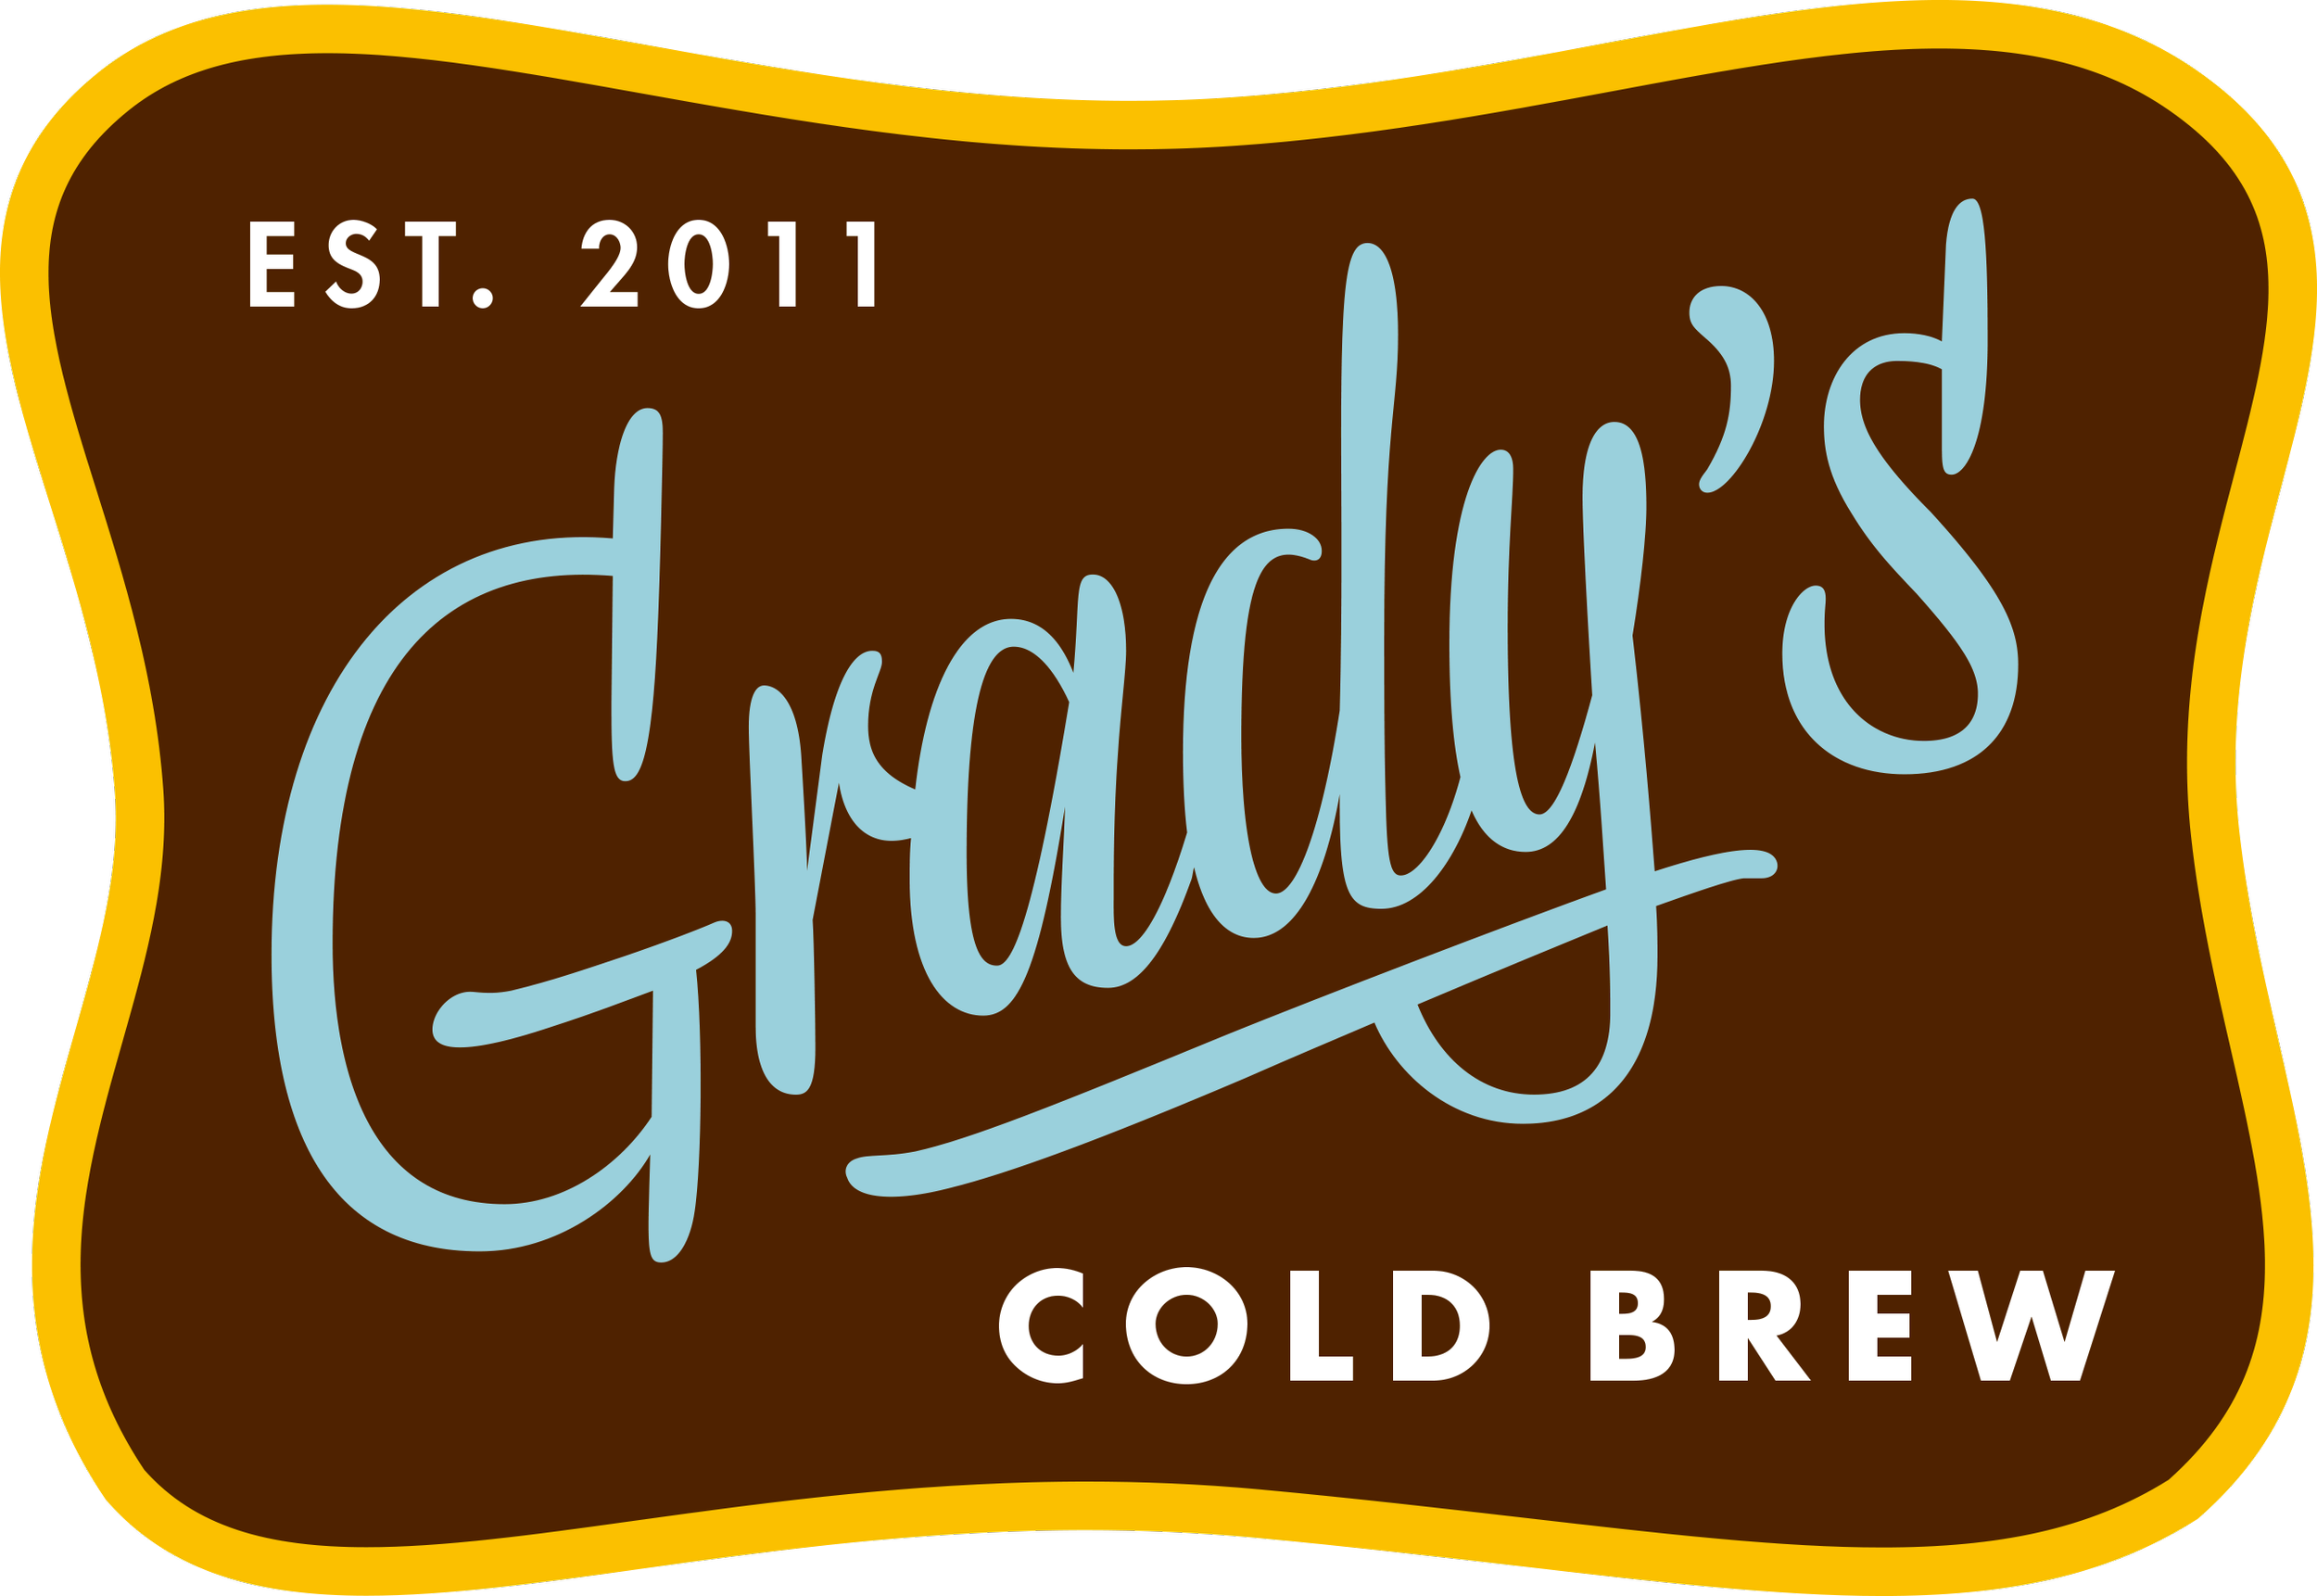 Grady's New Orleans Style Cold Brew Concentrates and Ready to Drink Coffee